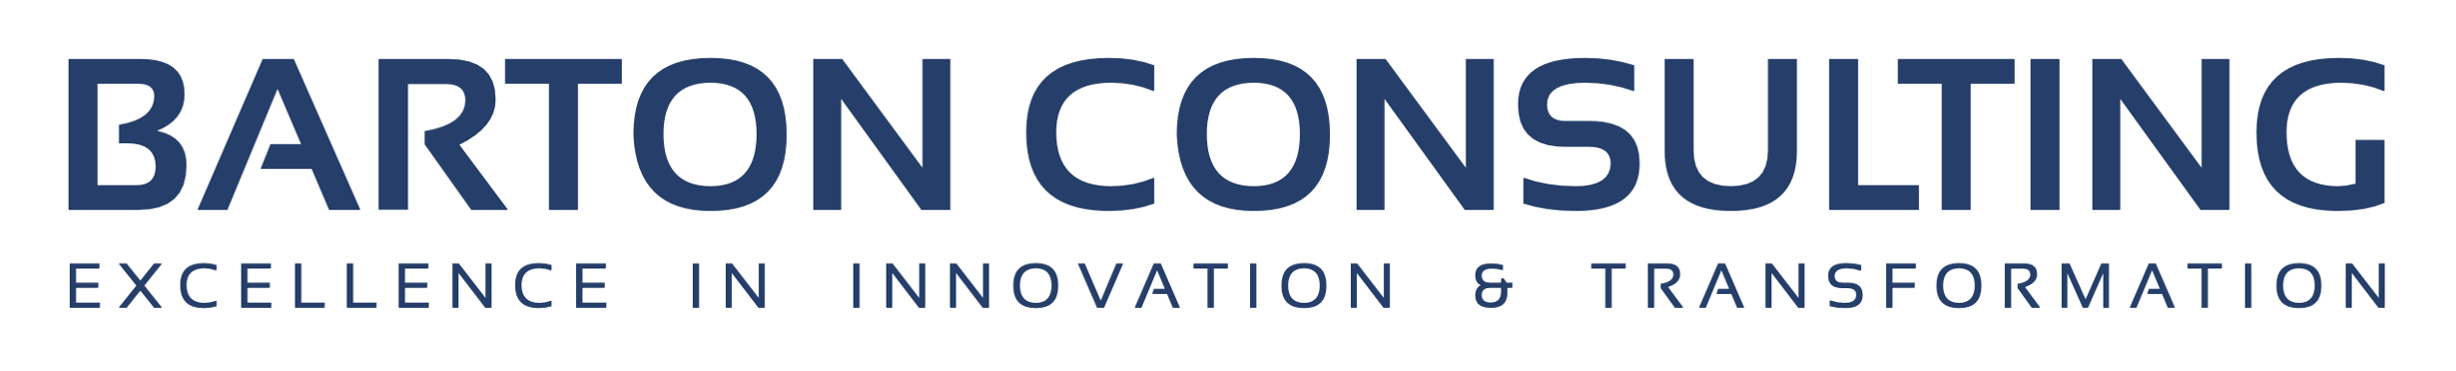 Barton Consulting - Excellence in Innovation & Transformation